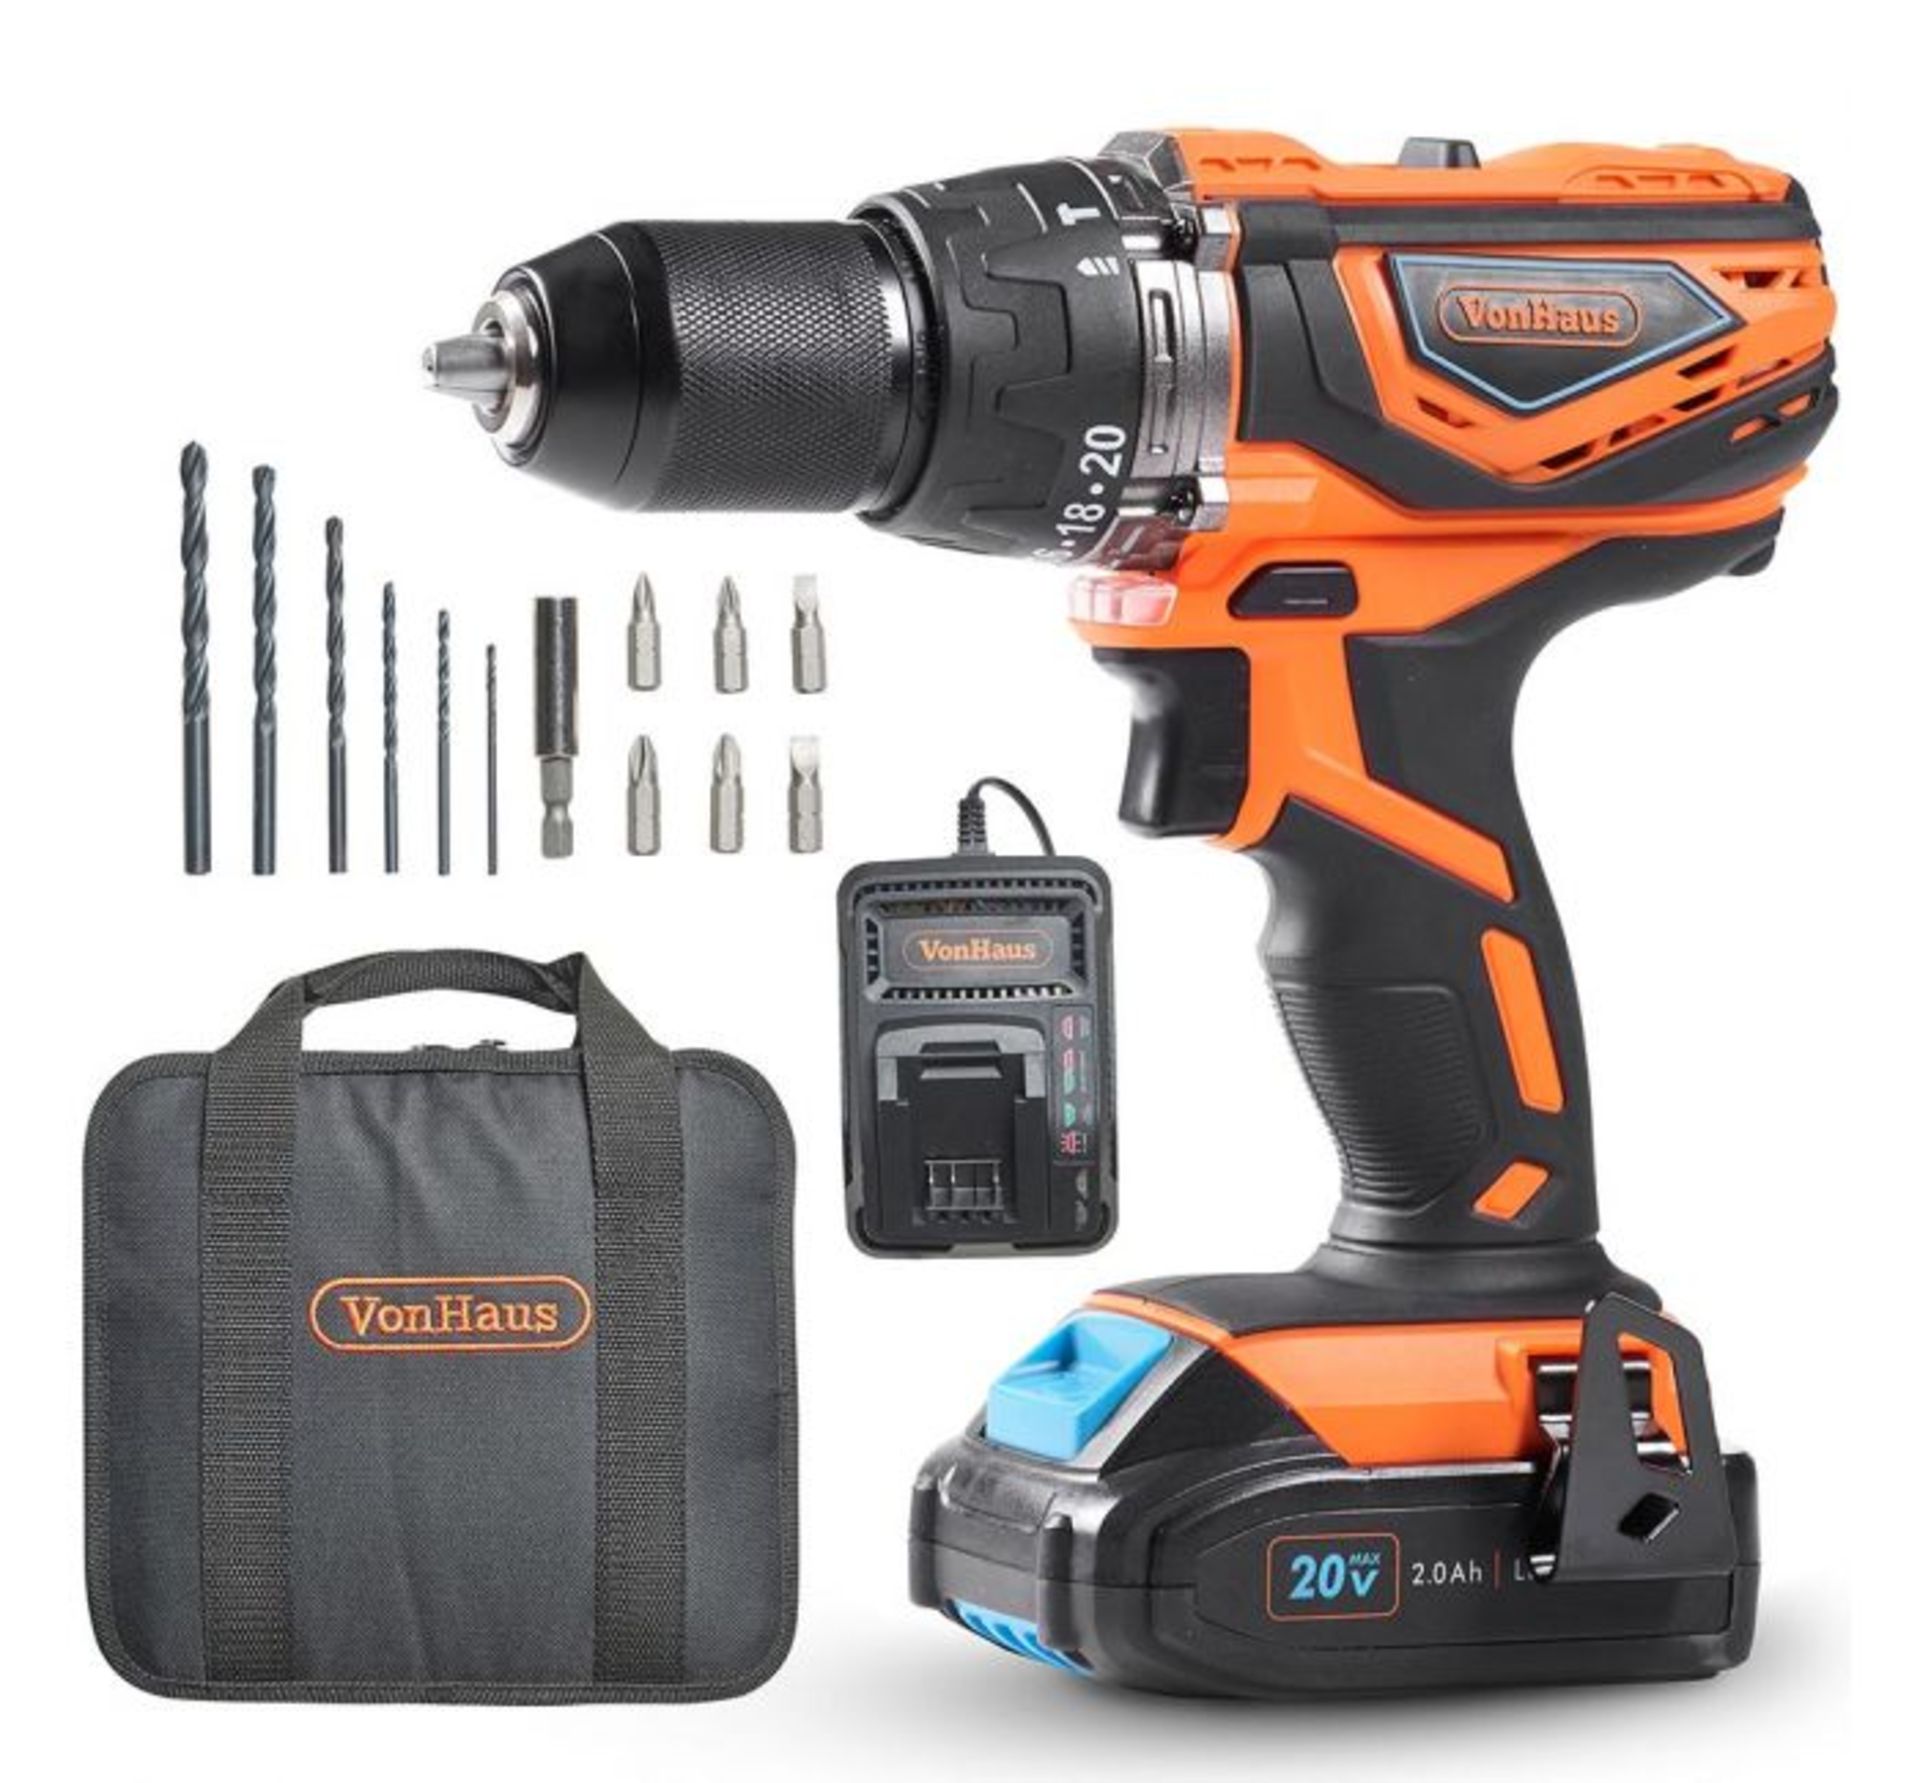 (DD33) 20V MAX Cordless Impact Combi Drill 20V Max 2Ah battery included is compatible with oth... - Image 2 of 3